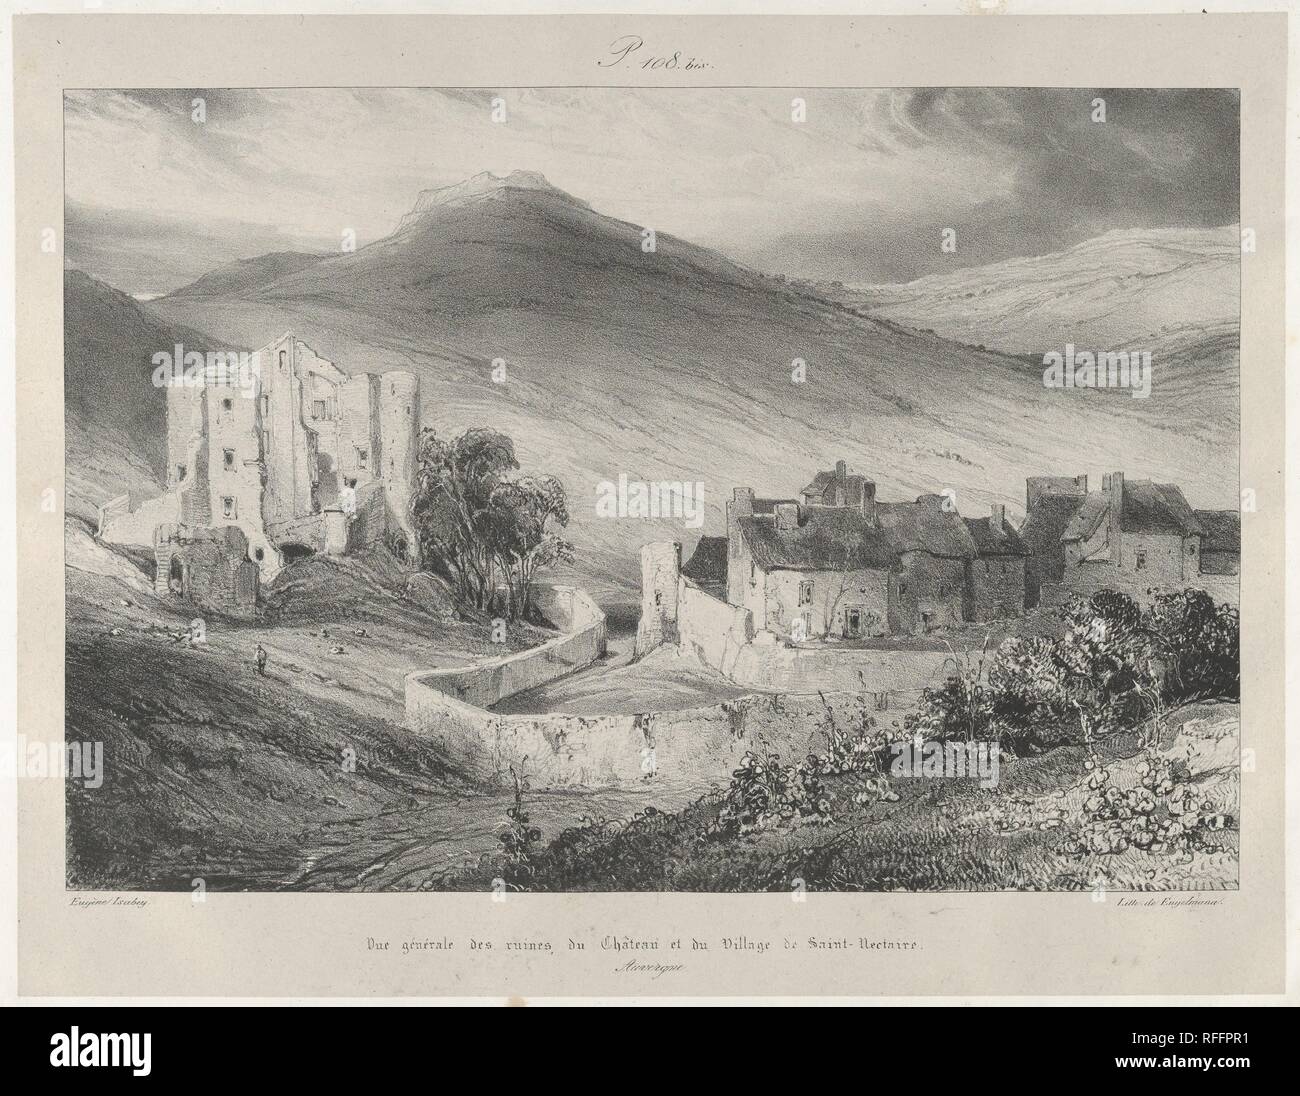 General View of Castle Ruins and of The Village of Saint-Necataire. Artist: Eugène Isabey (French, Paris 1803-1886 Lagny). Dimensions: Sheet: 20 7/8 in. × 14 in. (53.1 × 35.5 cm)  Image: 12 13/16 × 9 15/16 in. (32.5 × 25.2 cm). Printer: Godefroy Engelmann (German (born France), Mulhouse 1788-1839 Mulhouse). Series/Portfolio: Voyages Pittoresques et Romantiques dans L'Ancienne France. Date: probably 1831.  This is from the series of prints Eugène Isabey made for the 'Auvergne' chapter of  the book 'Voyages pittoresques et romantiques dans l'ancienne France'. Museum: Metropolitan Museum of Art,  Stock Photo